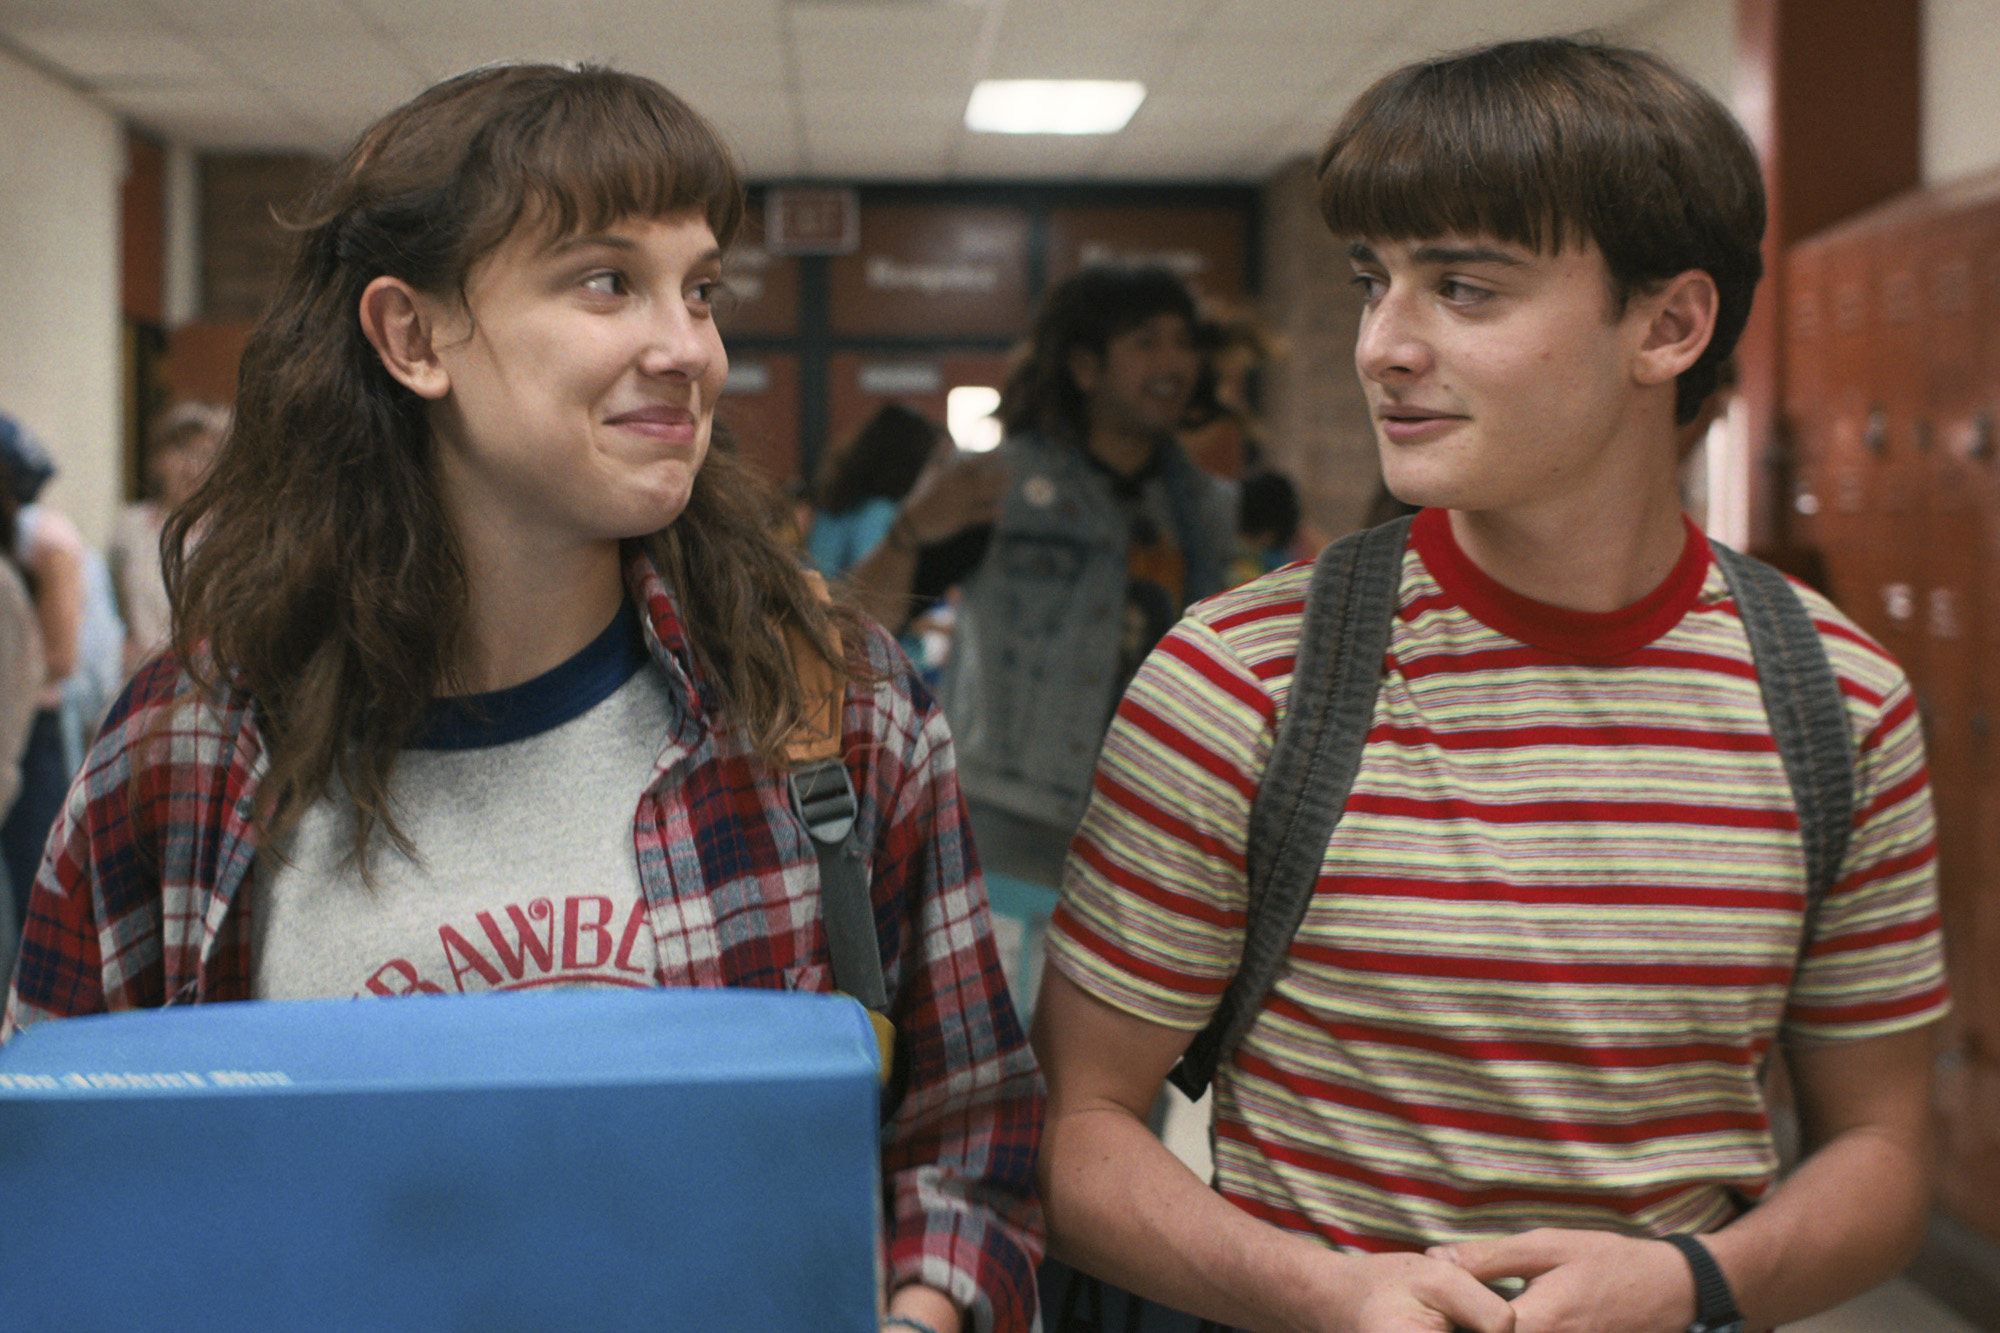 STRANGER THINGS. (L to R) Millie Bobby Brown as Eleven and Noah Schnapp as Will Byers in STRANGER THINGS. Cr. Courtesy of Netflix © 2022